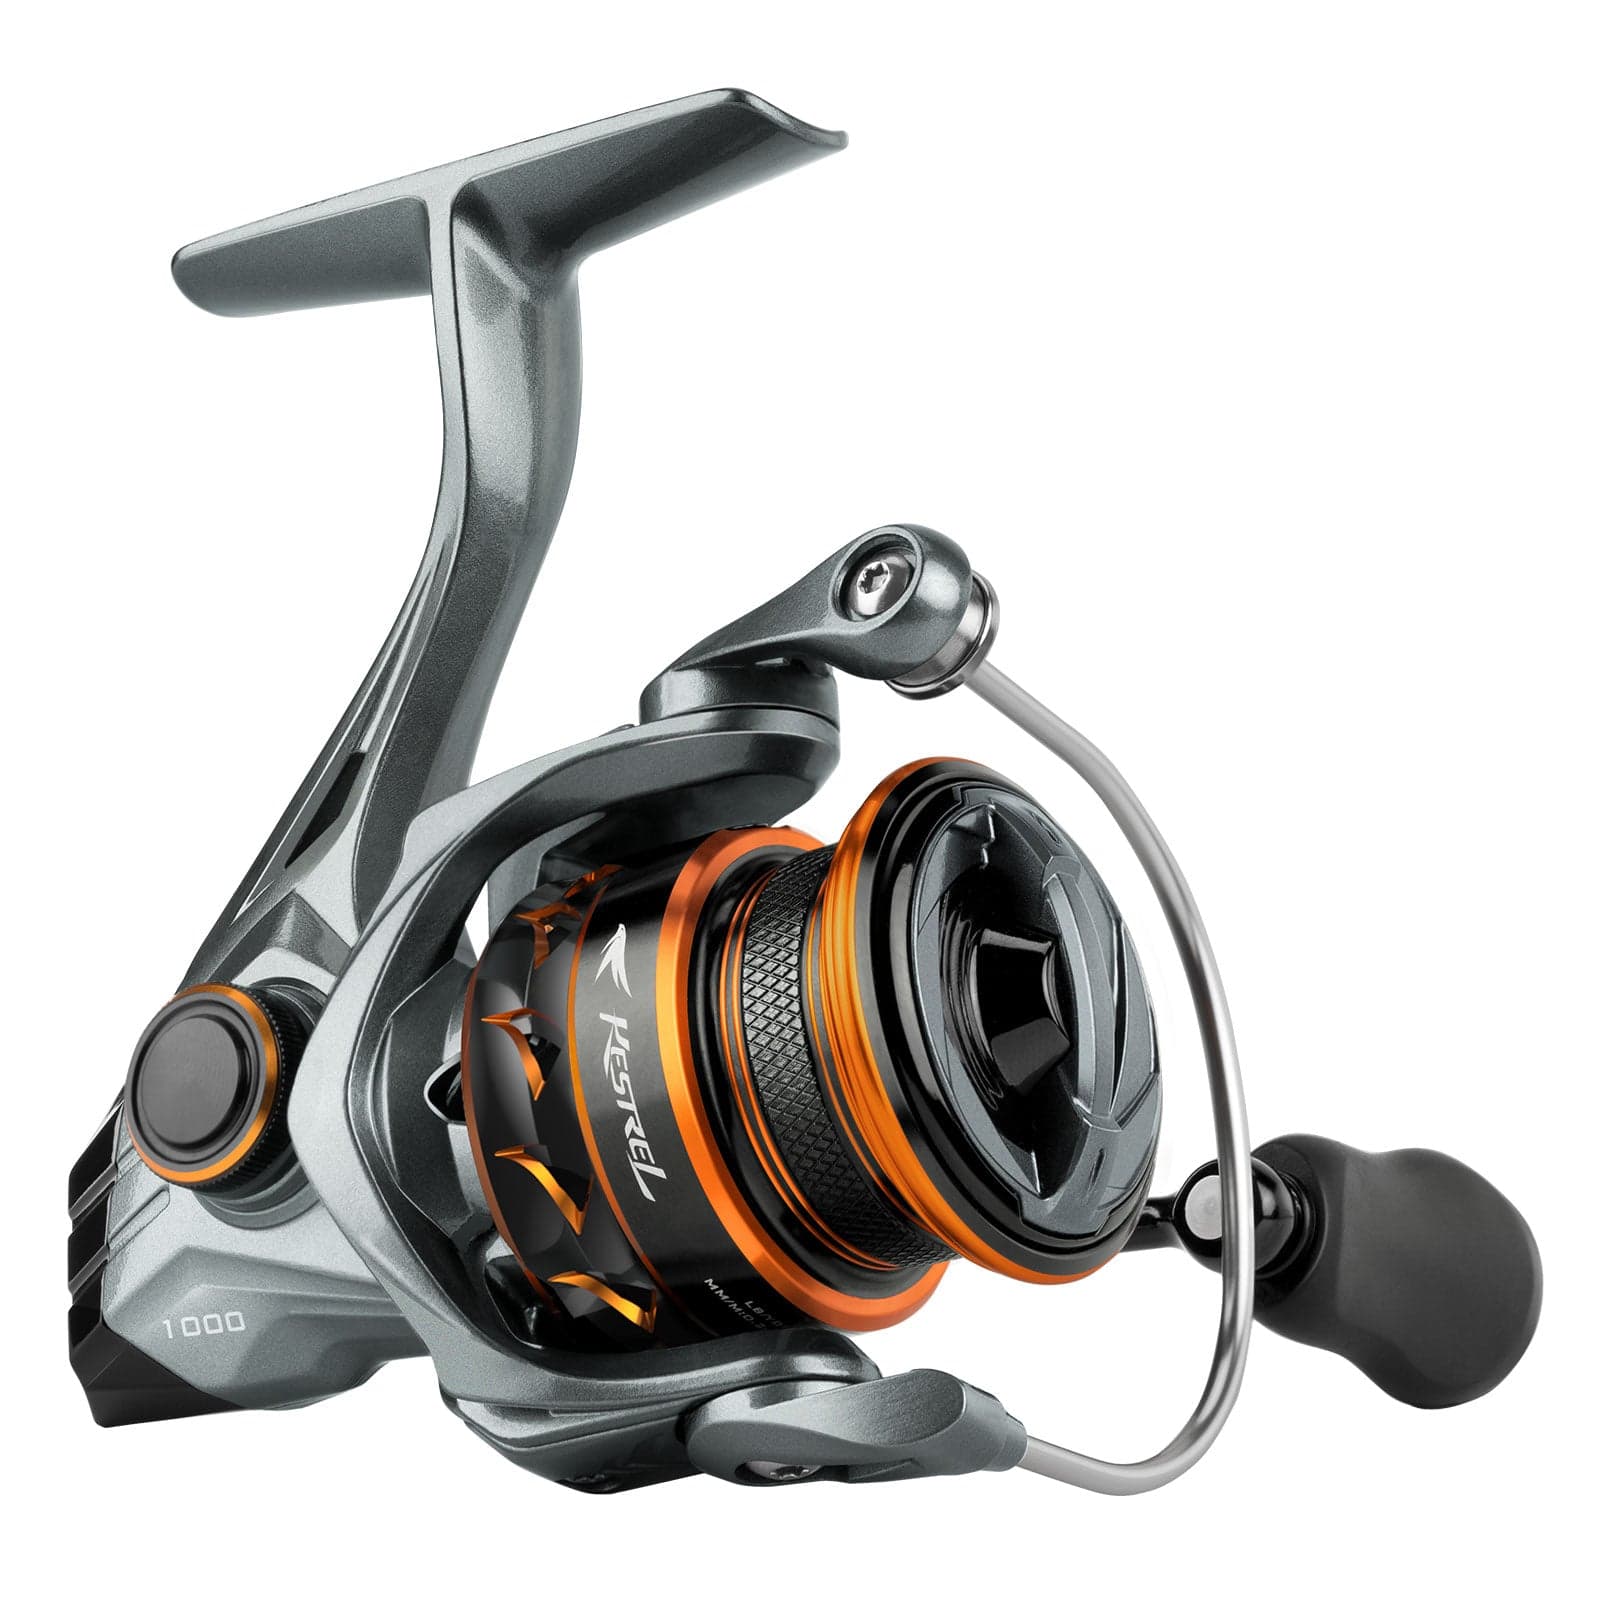 KastKing Centron Spinning Reel - What Did You Expect for 20